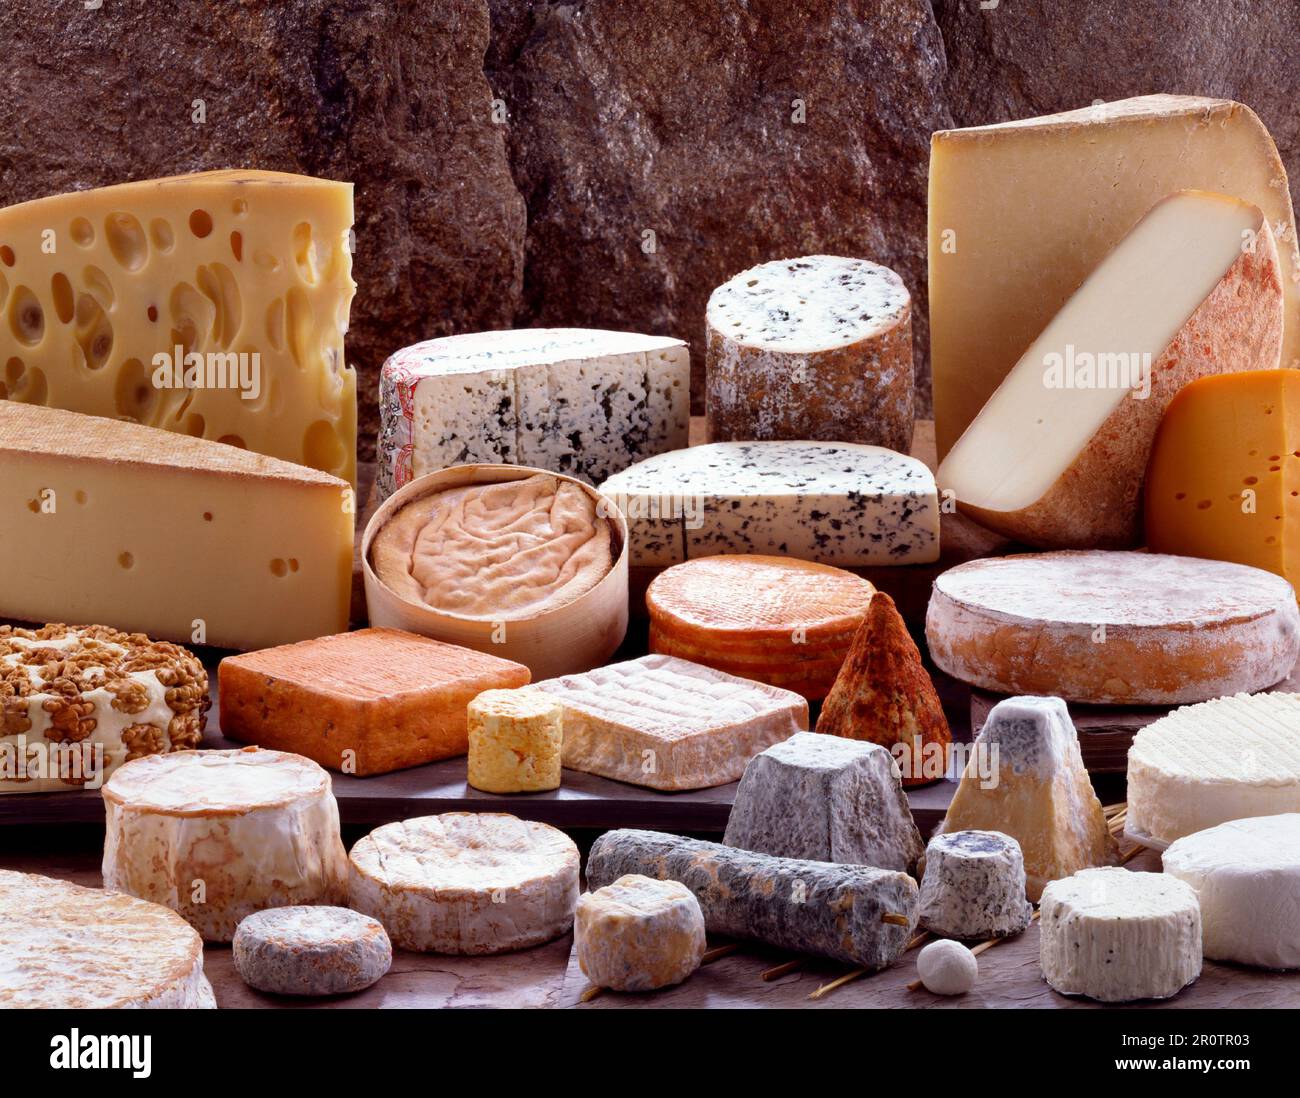 Selection of cheeses Stock Photo